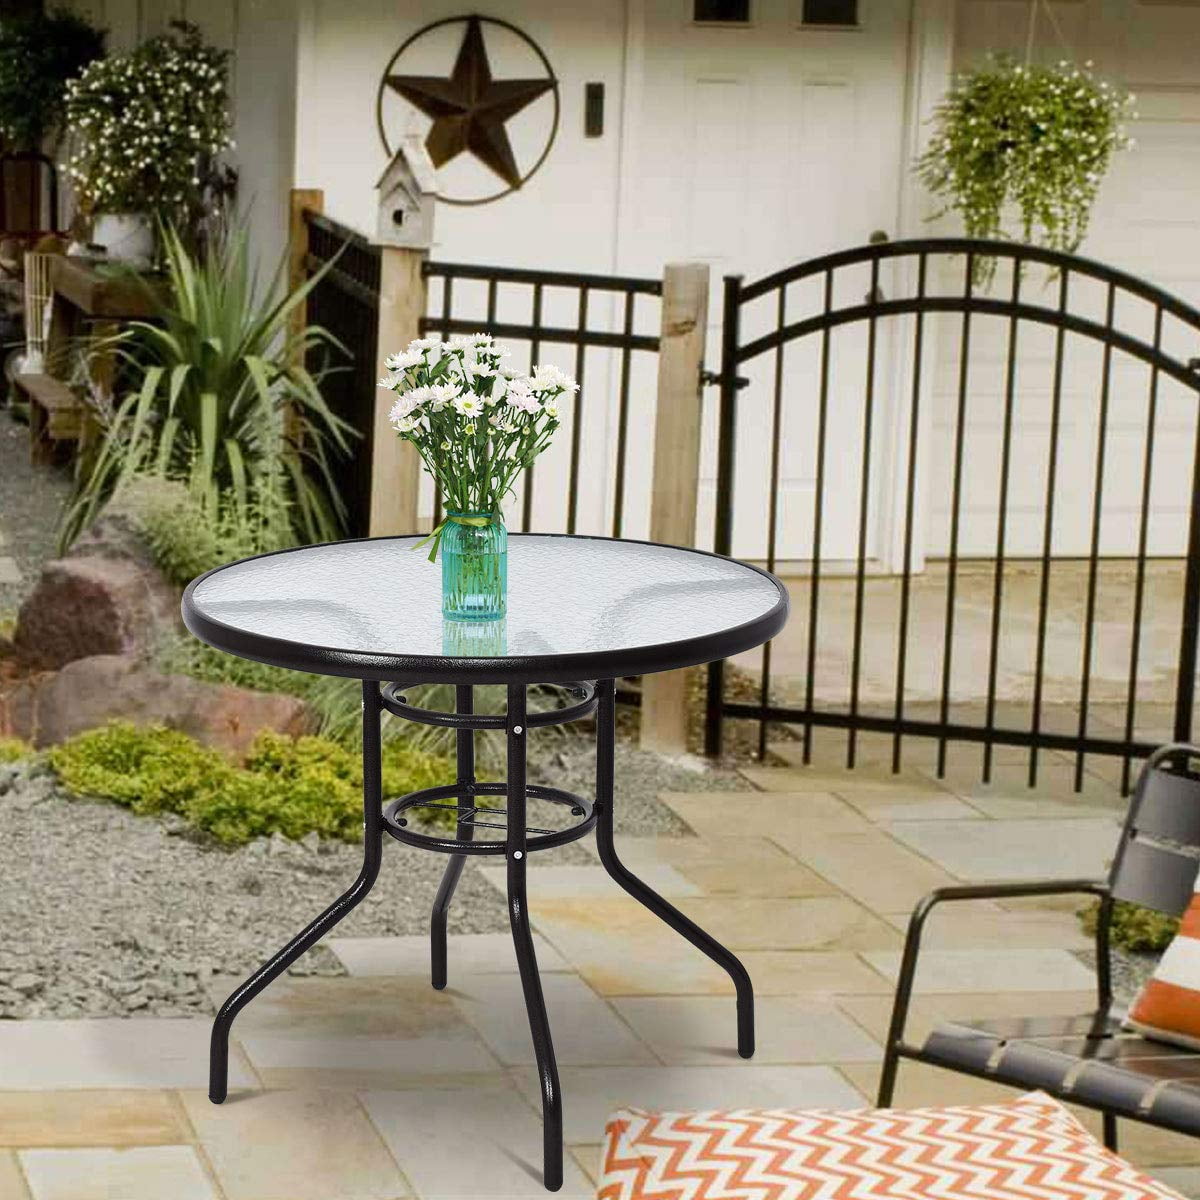 Outdoor Dining Table, Patio Furniture Table With Umbrella Hole